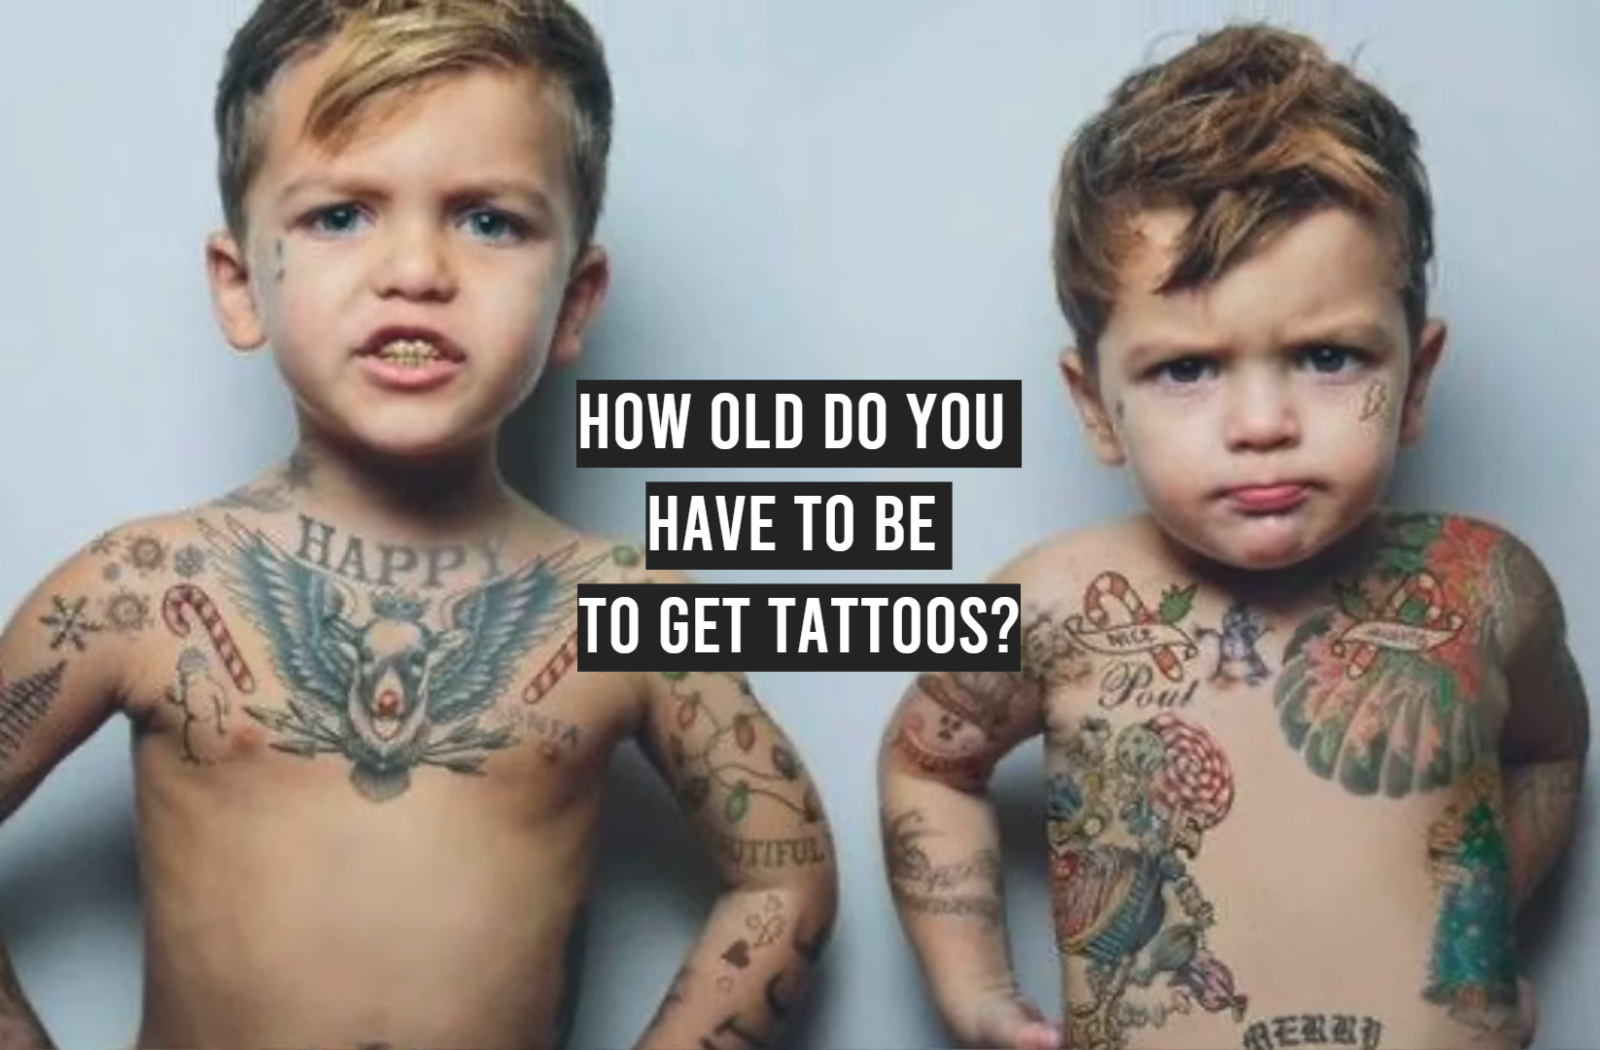 How Old Do You Have to Be to Get Tattoos? - TattooProfy